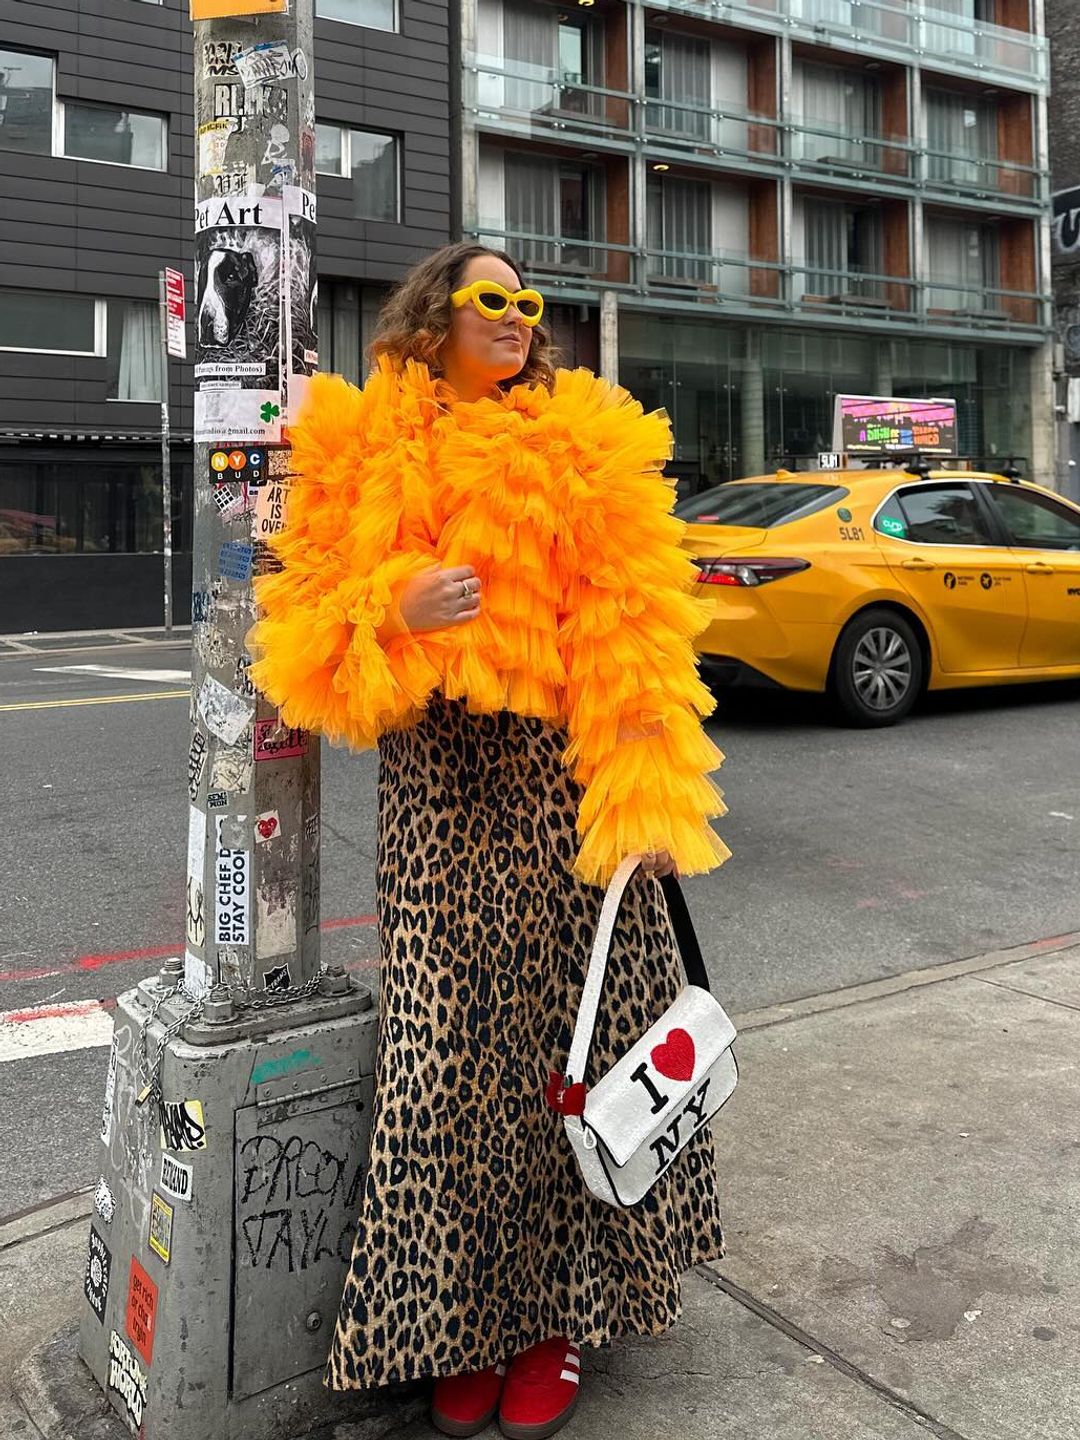 Style muse @styled.daisy wears a fluffy orange jacket, leopard print skirt and red trainers while out in NYC